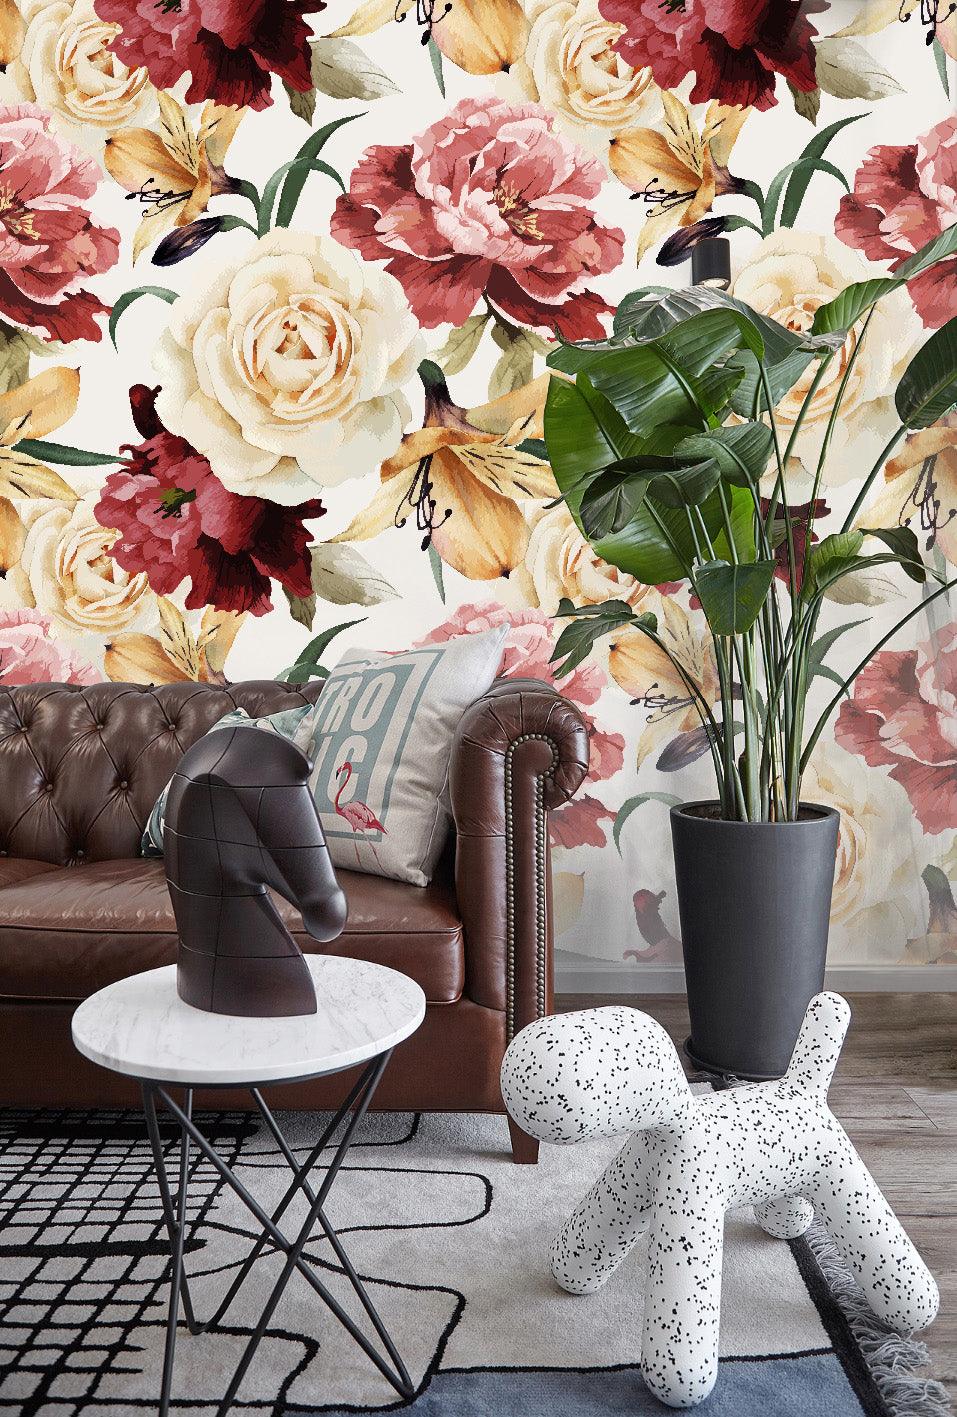 3D Red Rose Watercolor Background Wall Mural Wallpaper 26- Jess Art Decoration